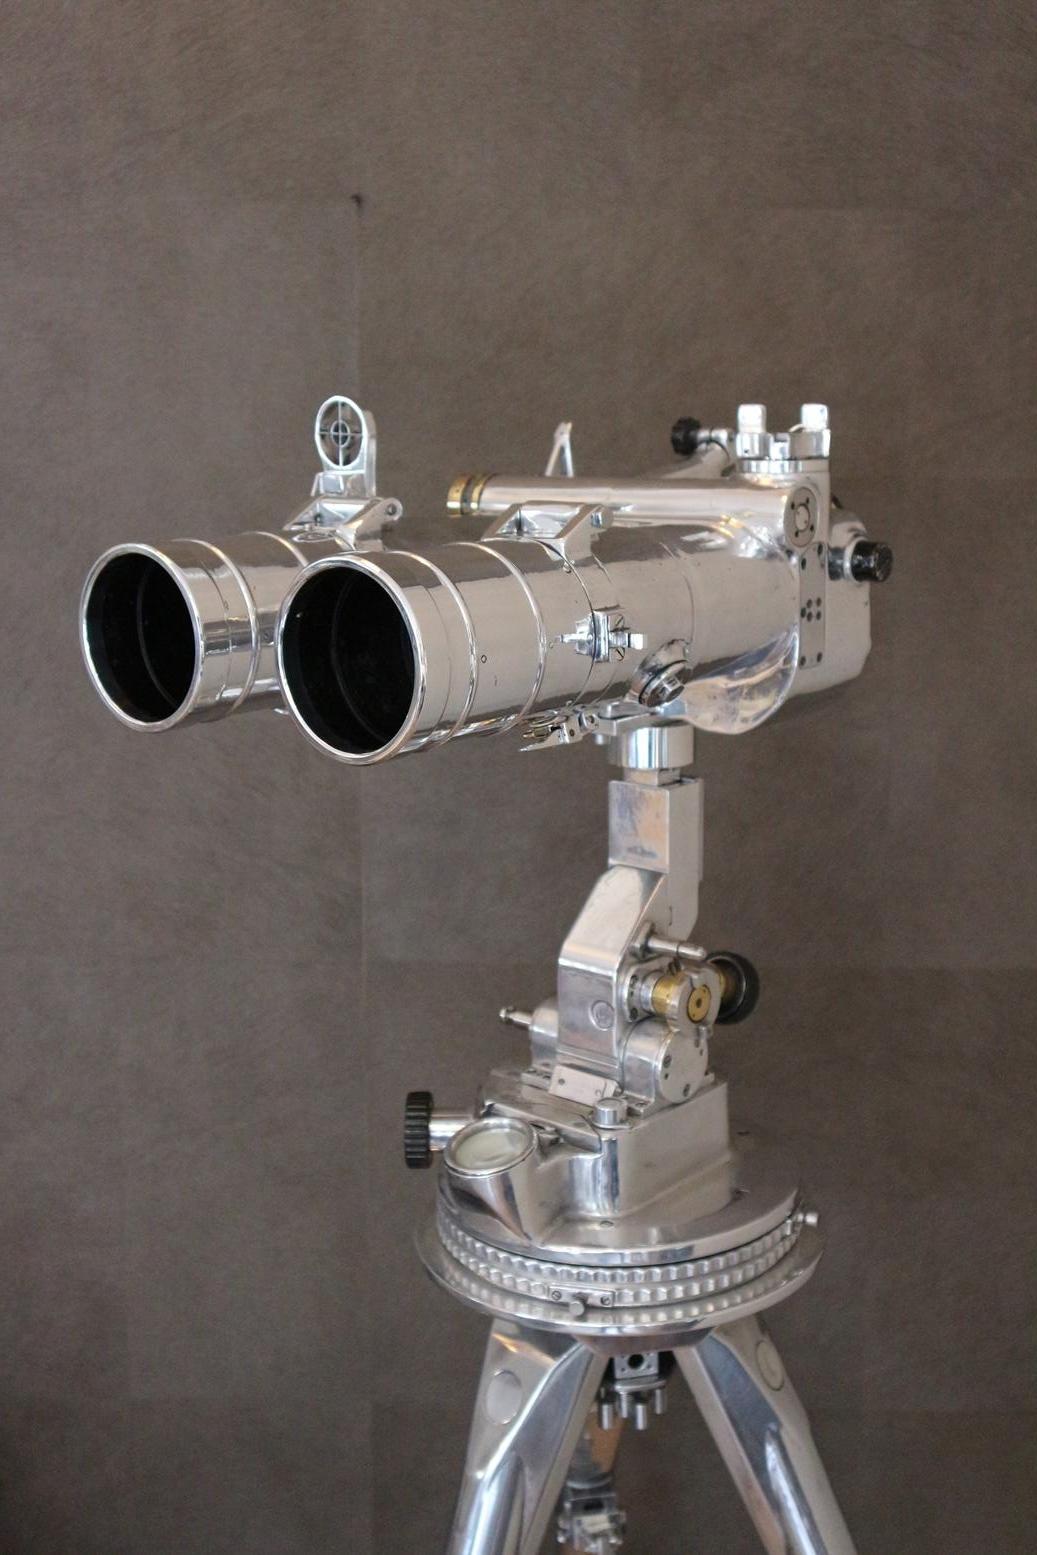 Fully polished German Kriegsmarine binoculars that were used on German warships in World War II as anti-aircraft guns and as observation viewers
The lenses are coated, which gives a particularly good optical image with more clarity,
contrast and